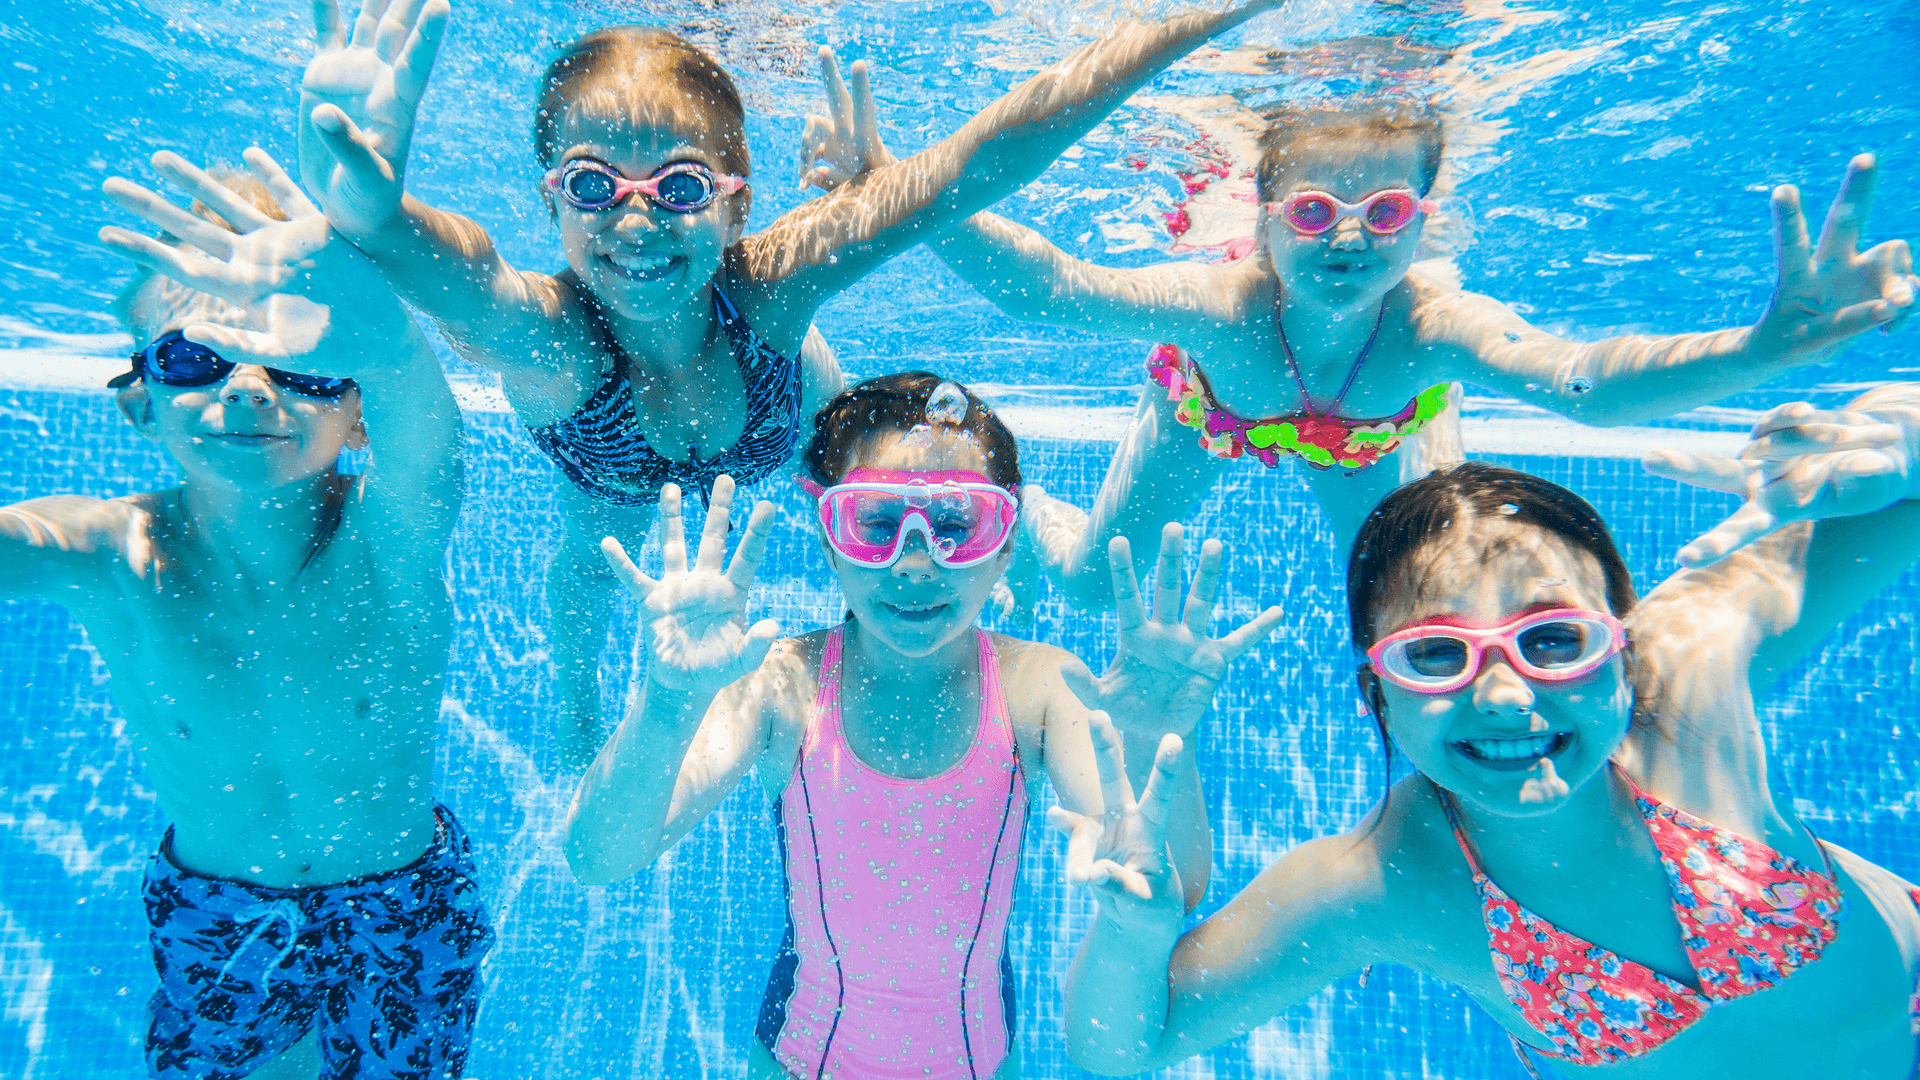 Group of 5 children in the pool